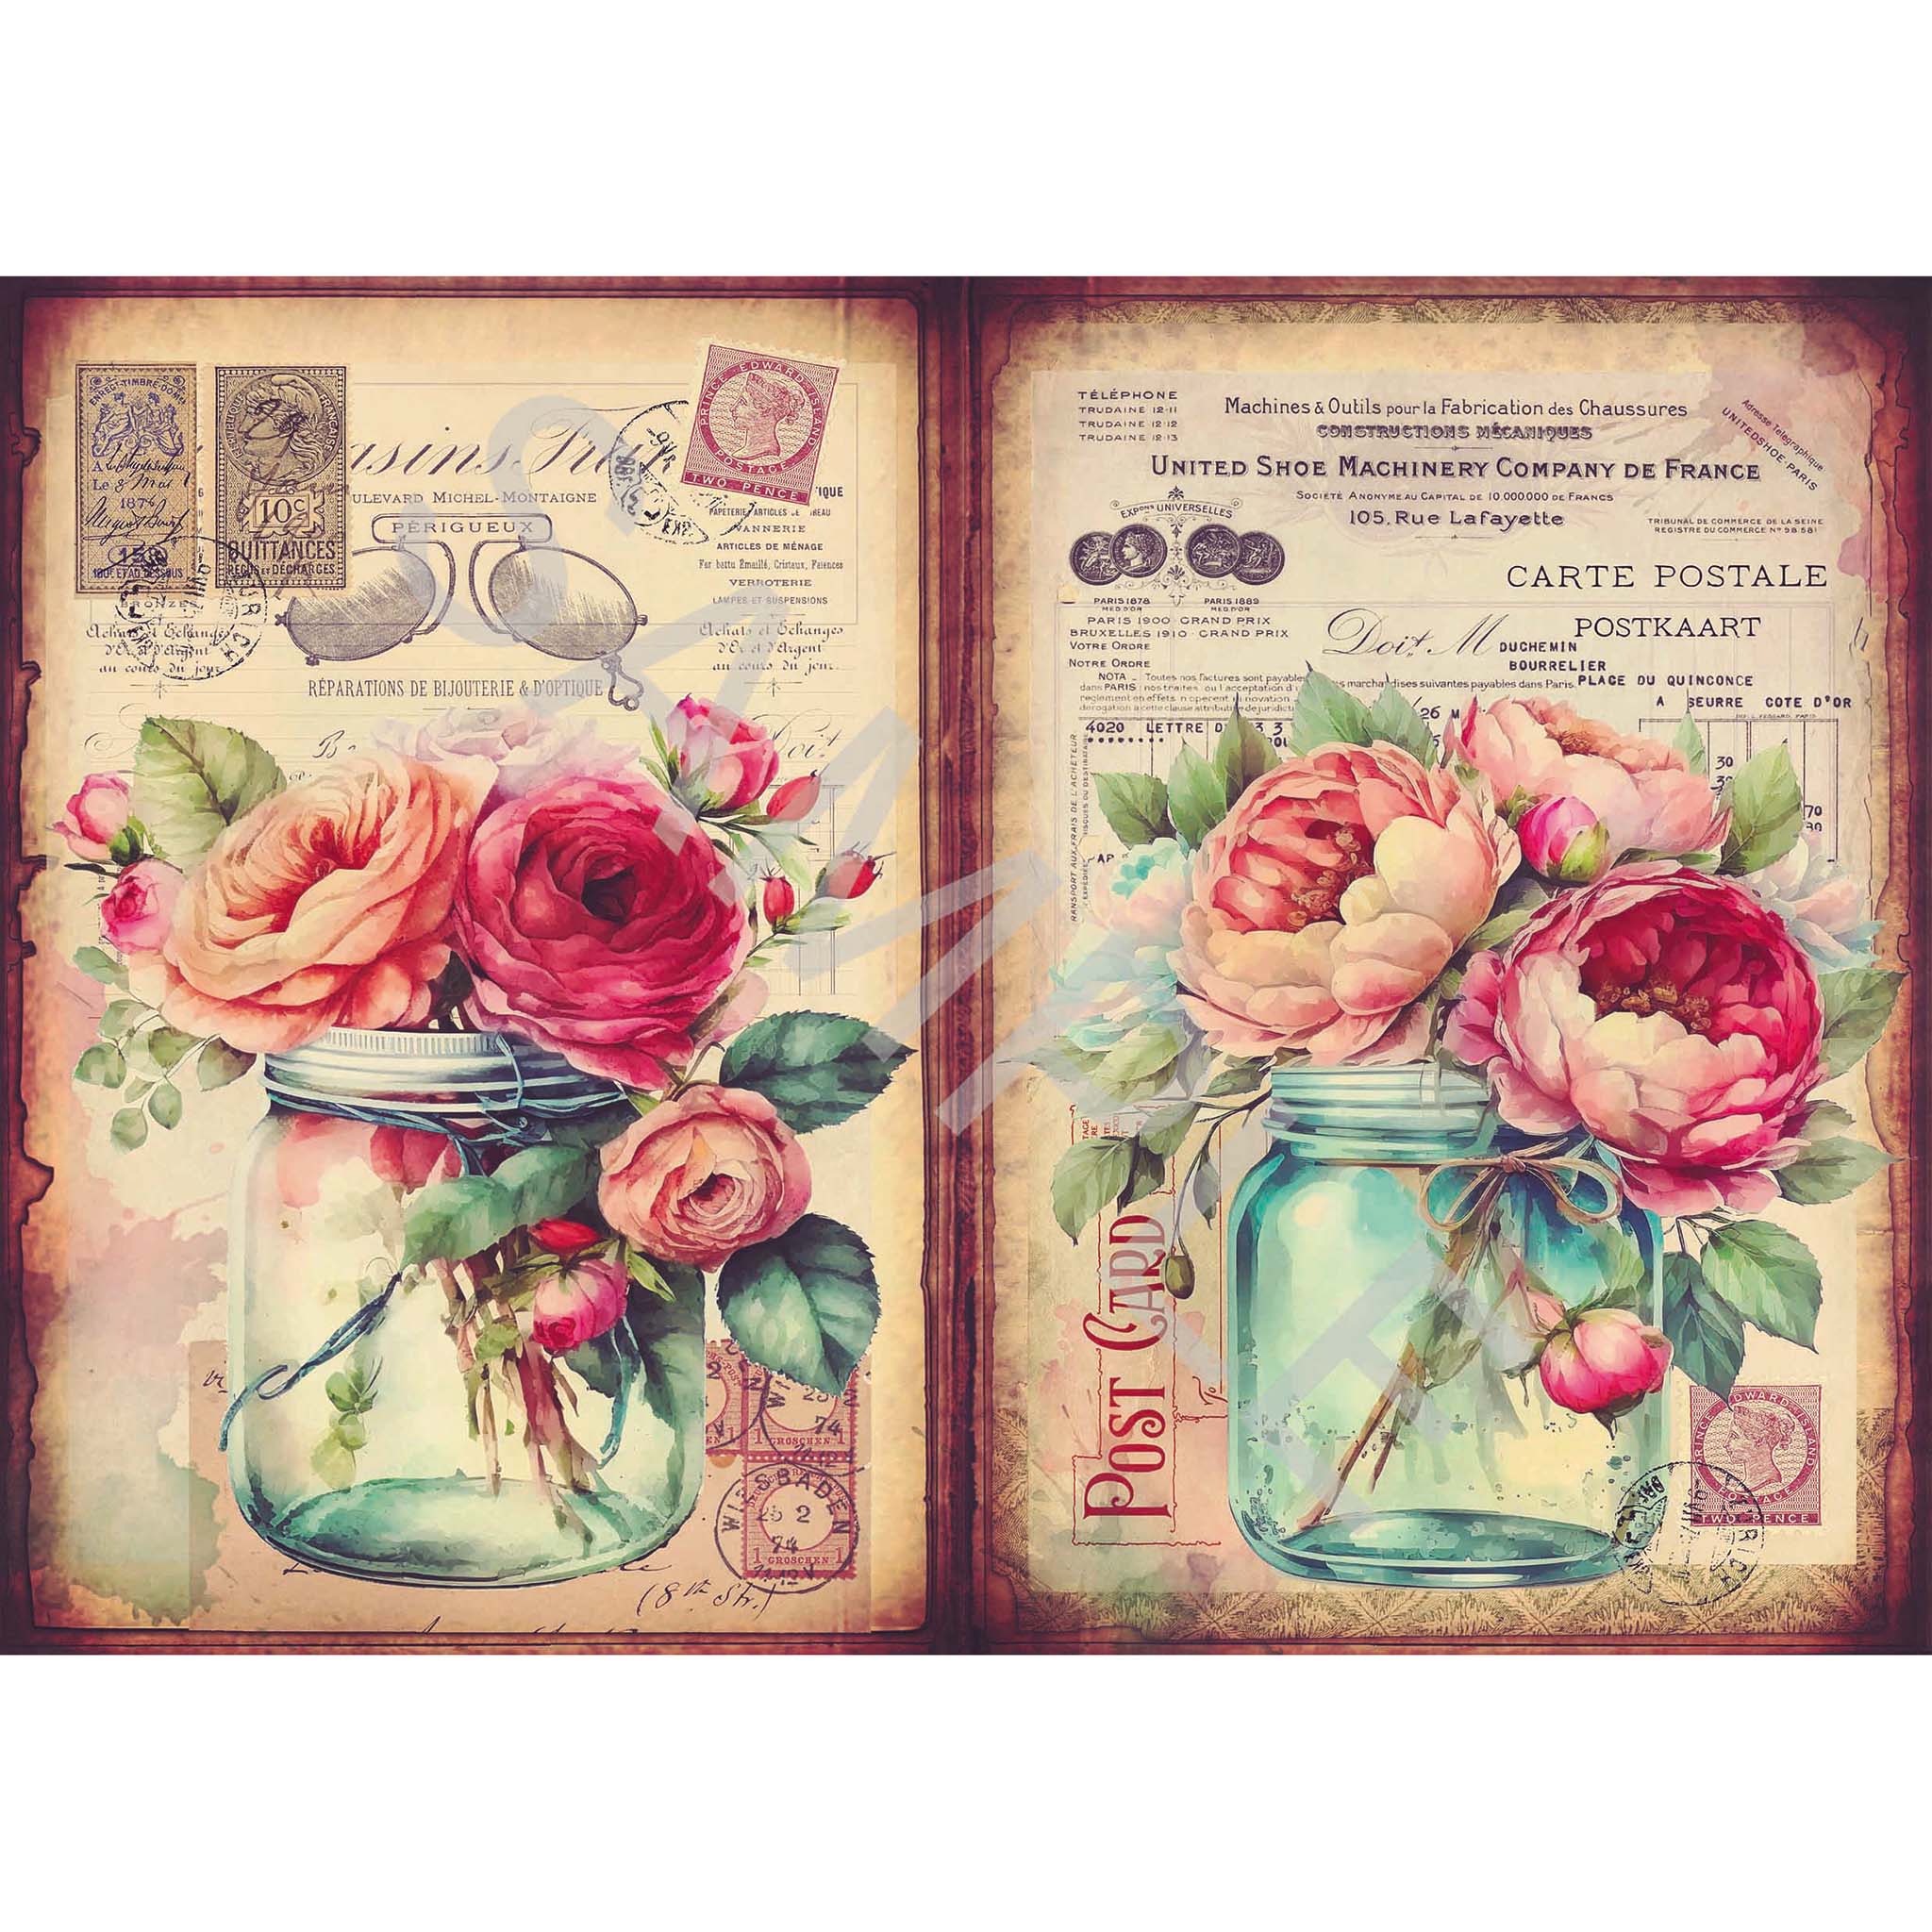 A4 rice paper design that features two images of pink flowers in mason jars with vintage document backgrounds. White borders are on the top and bottom.